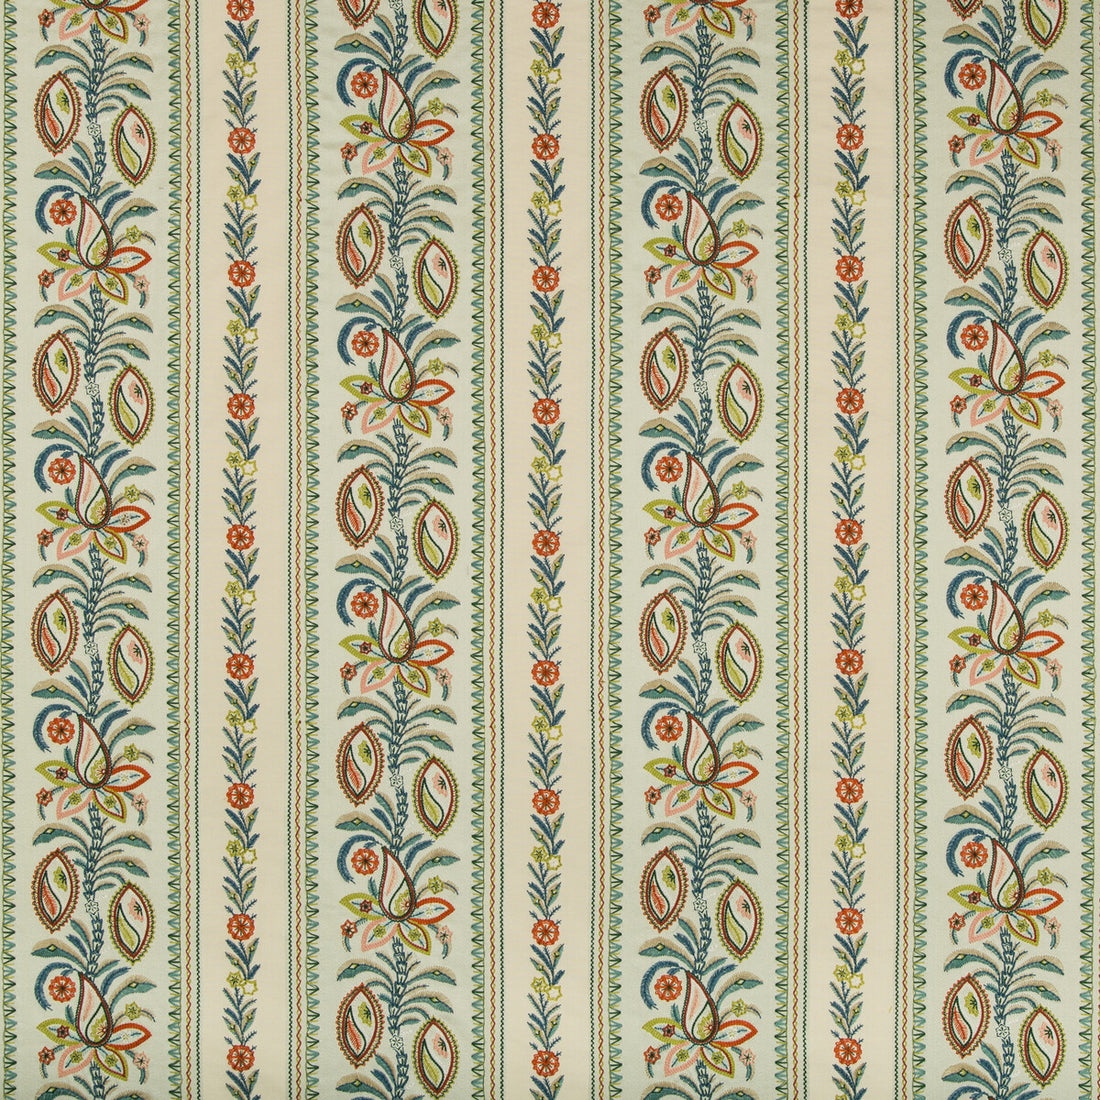 Henner Emb fabric in mist color - pattern 8019107.133.0 - by Brunschwig &amp; Fils in the Folio Francais collection